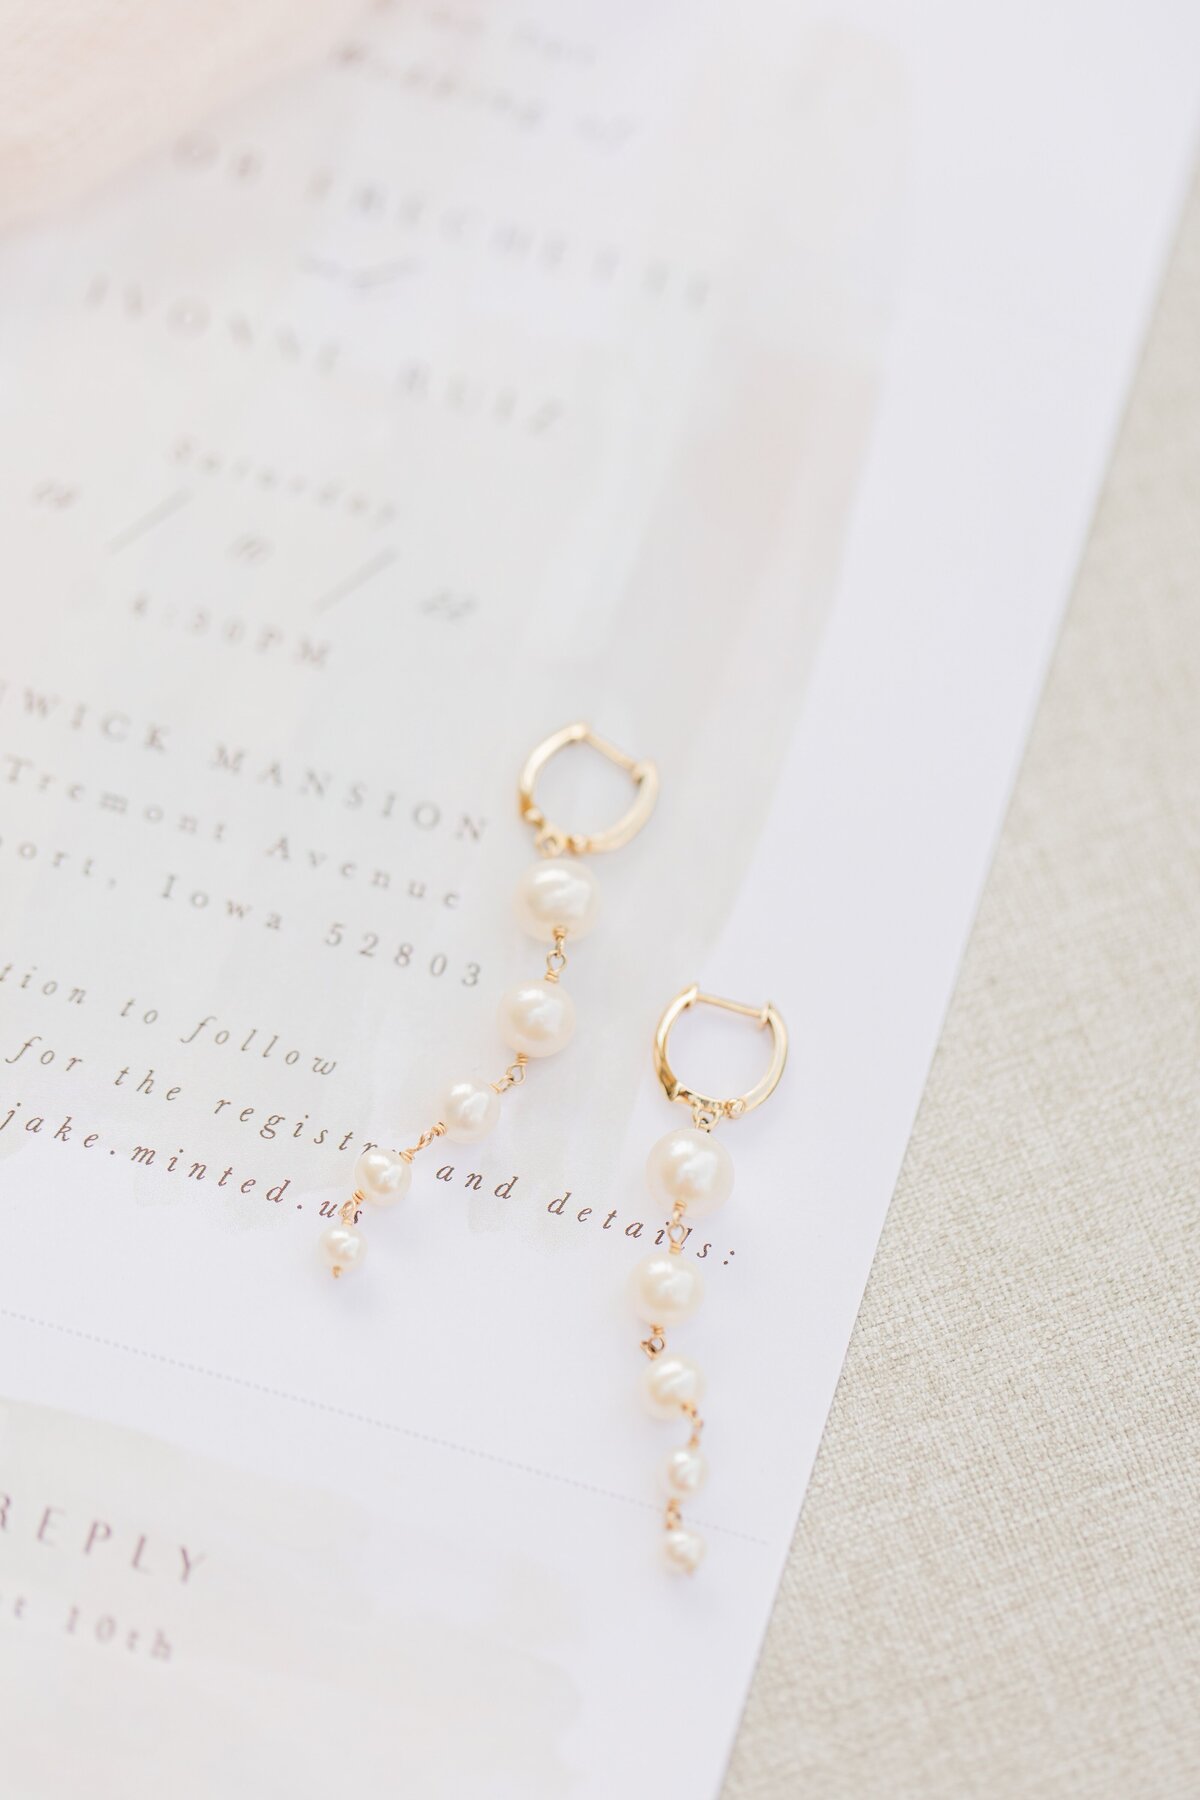 Elegant gold earrings with pearl accents displayed on an Iowa wedding invitation with cursive text.